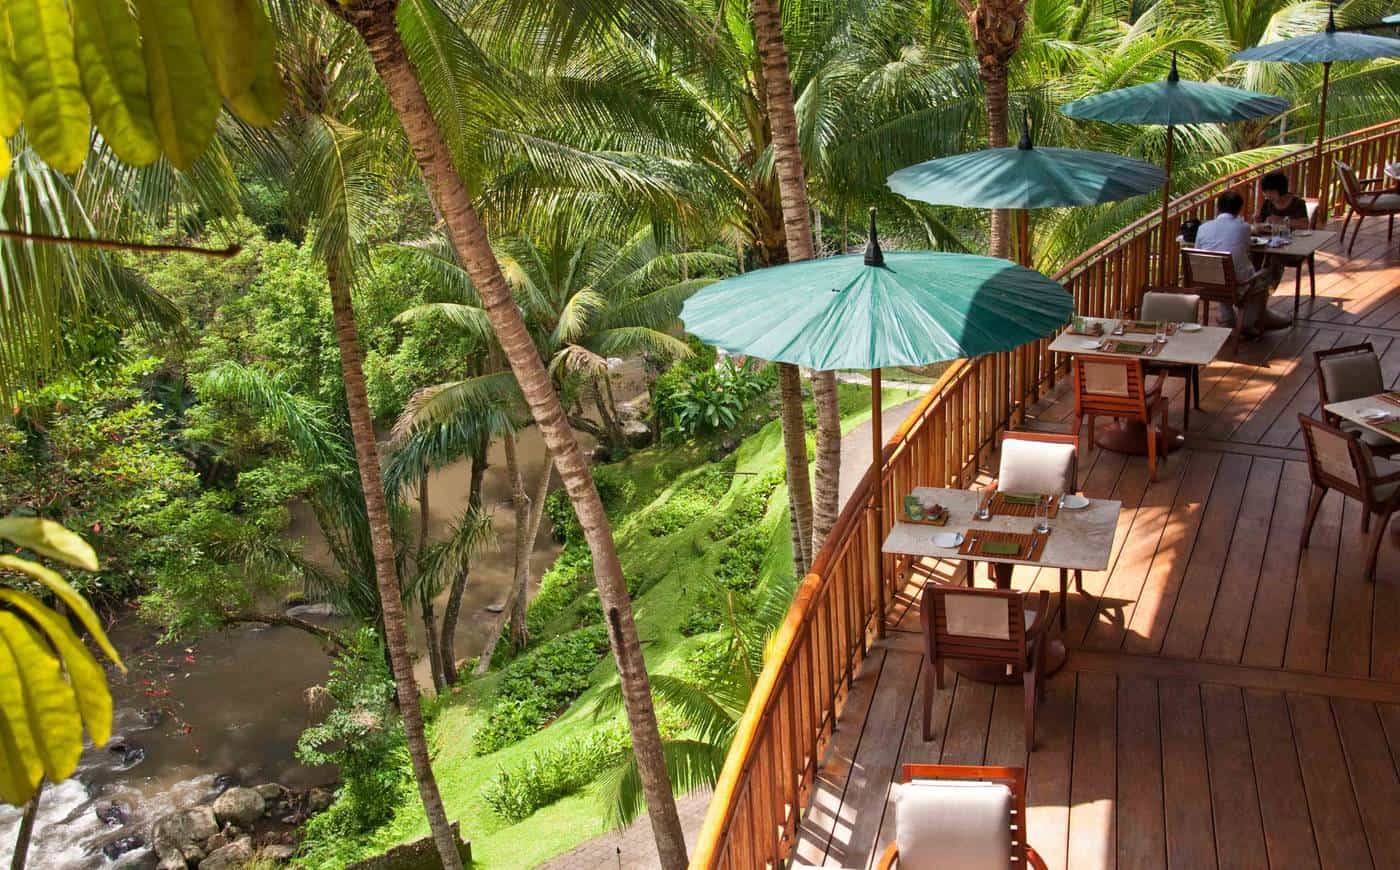 UBUD - EAT, PRAY AND LOVE IN STYLE - Travel magazine for a curious